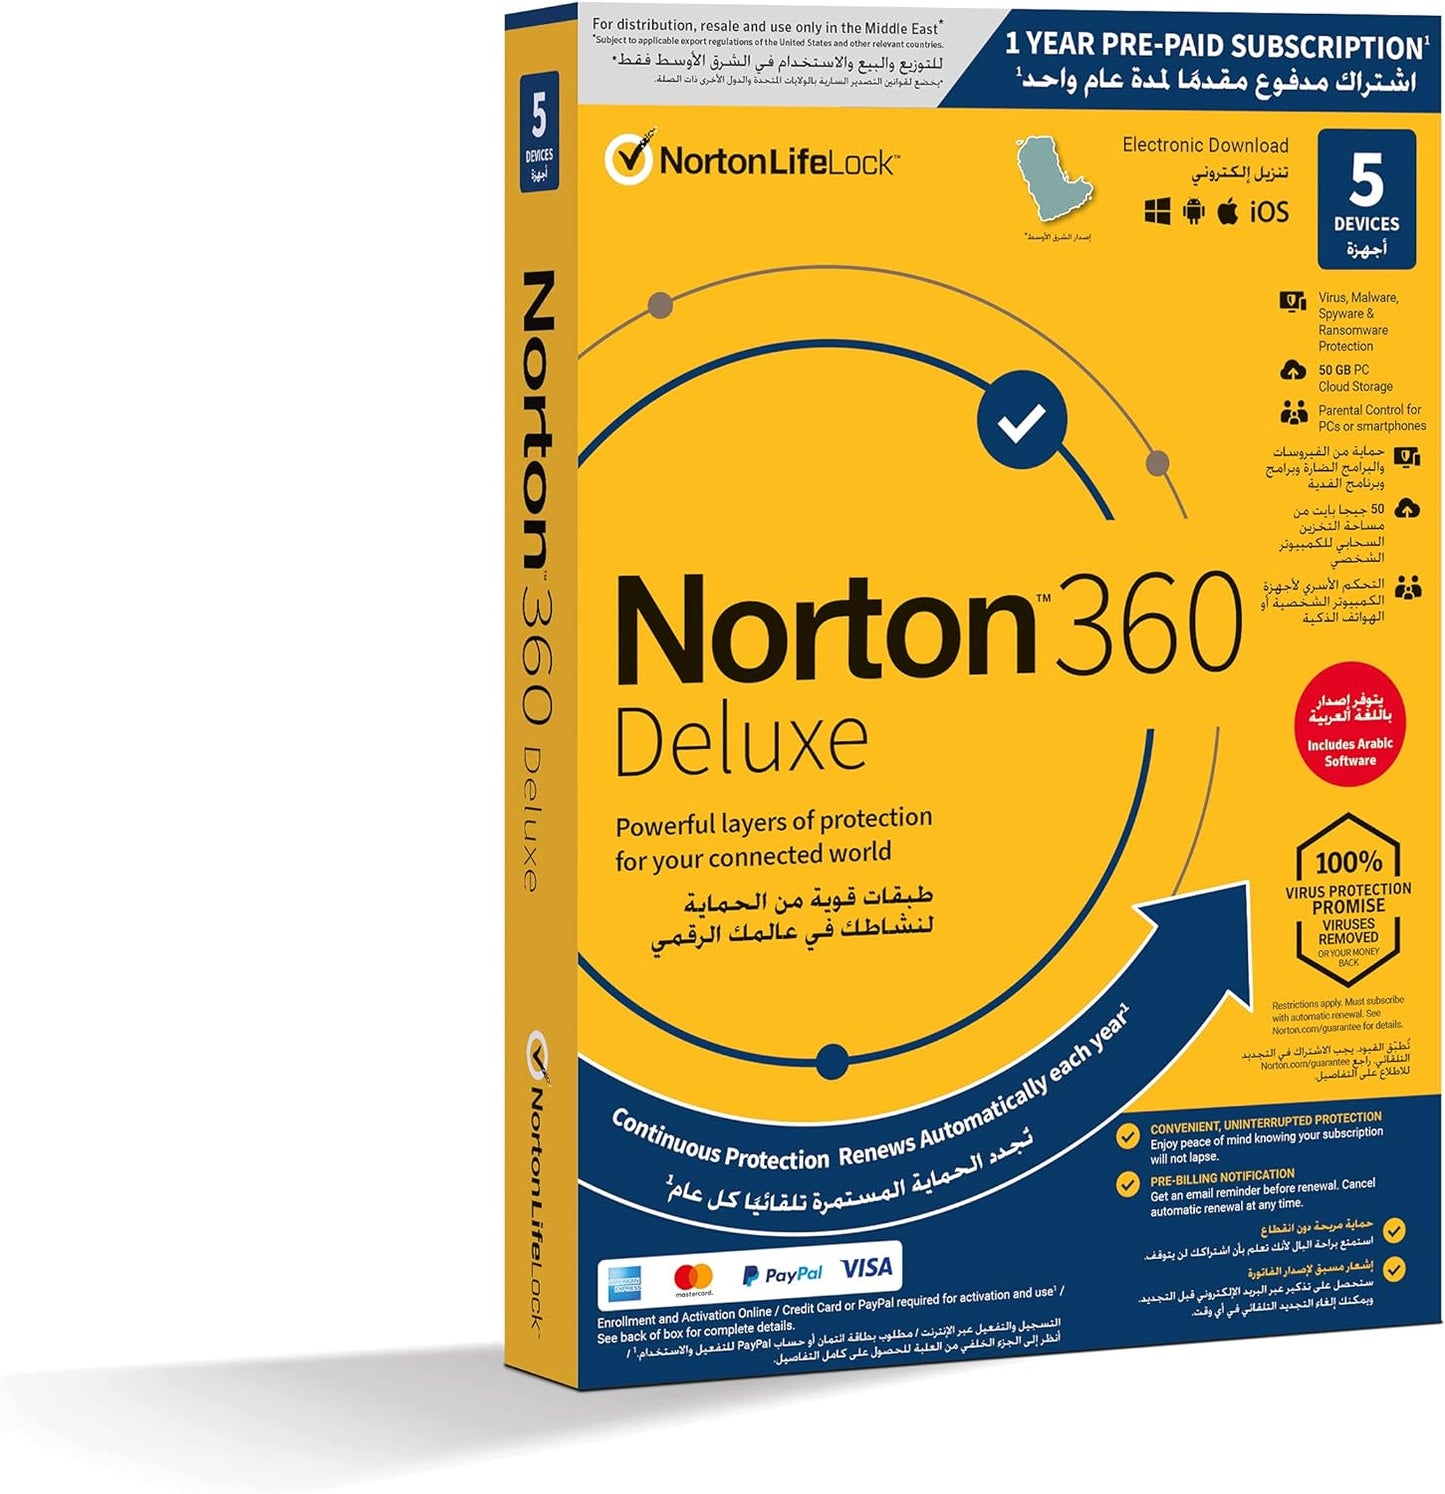 Norton 360 Premium 2021, 10 Devices, Internet Secu[rity, Antivirus and VPN, Hacking / Data Theft Protection, Password Manager, 75 GB Cloud Backup, PC / Mac® / Phones / Tablets, English